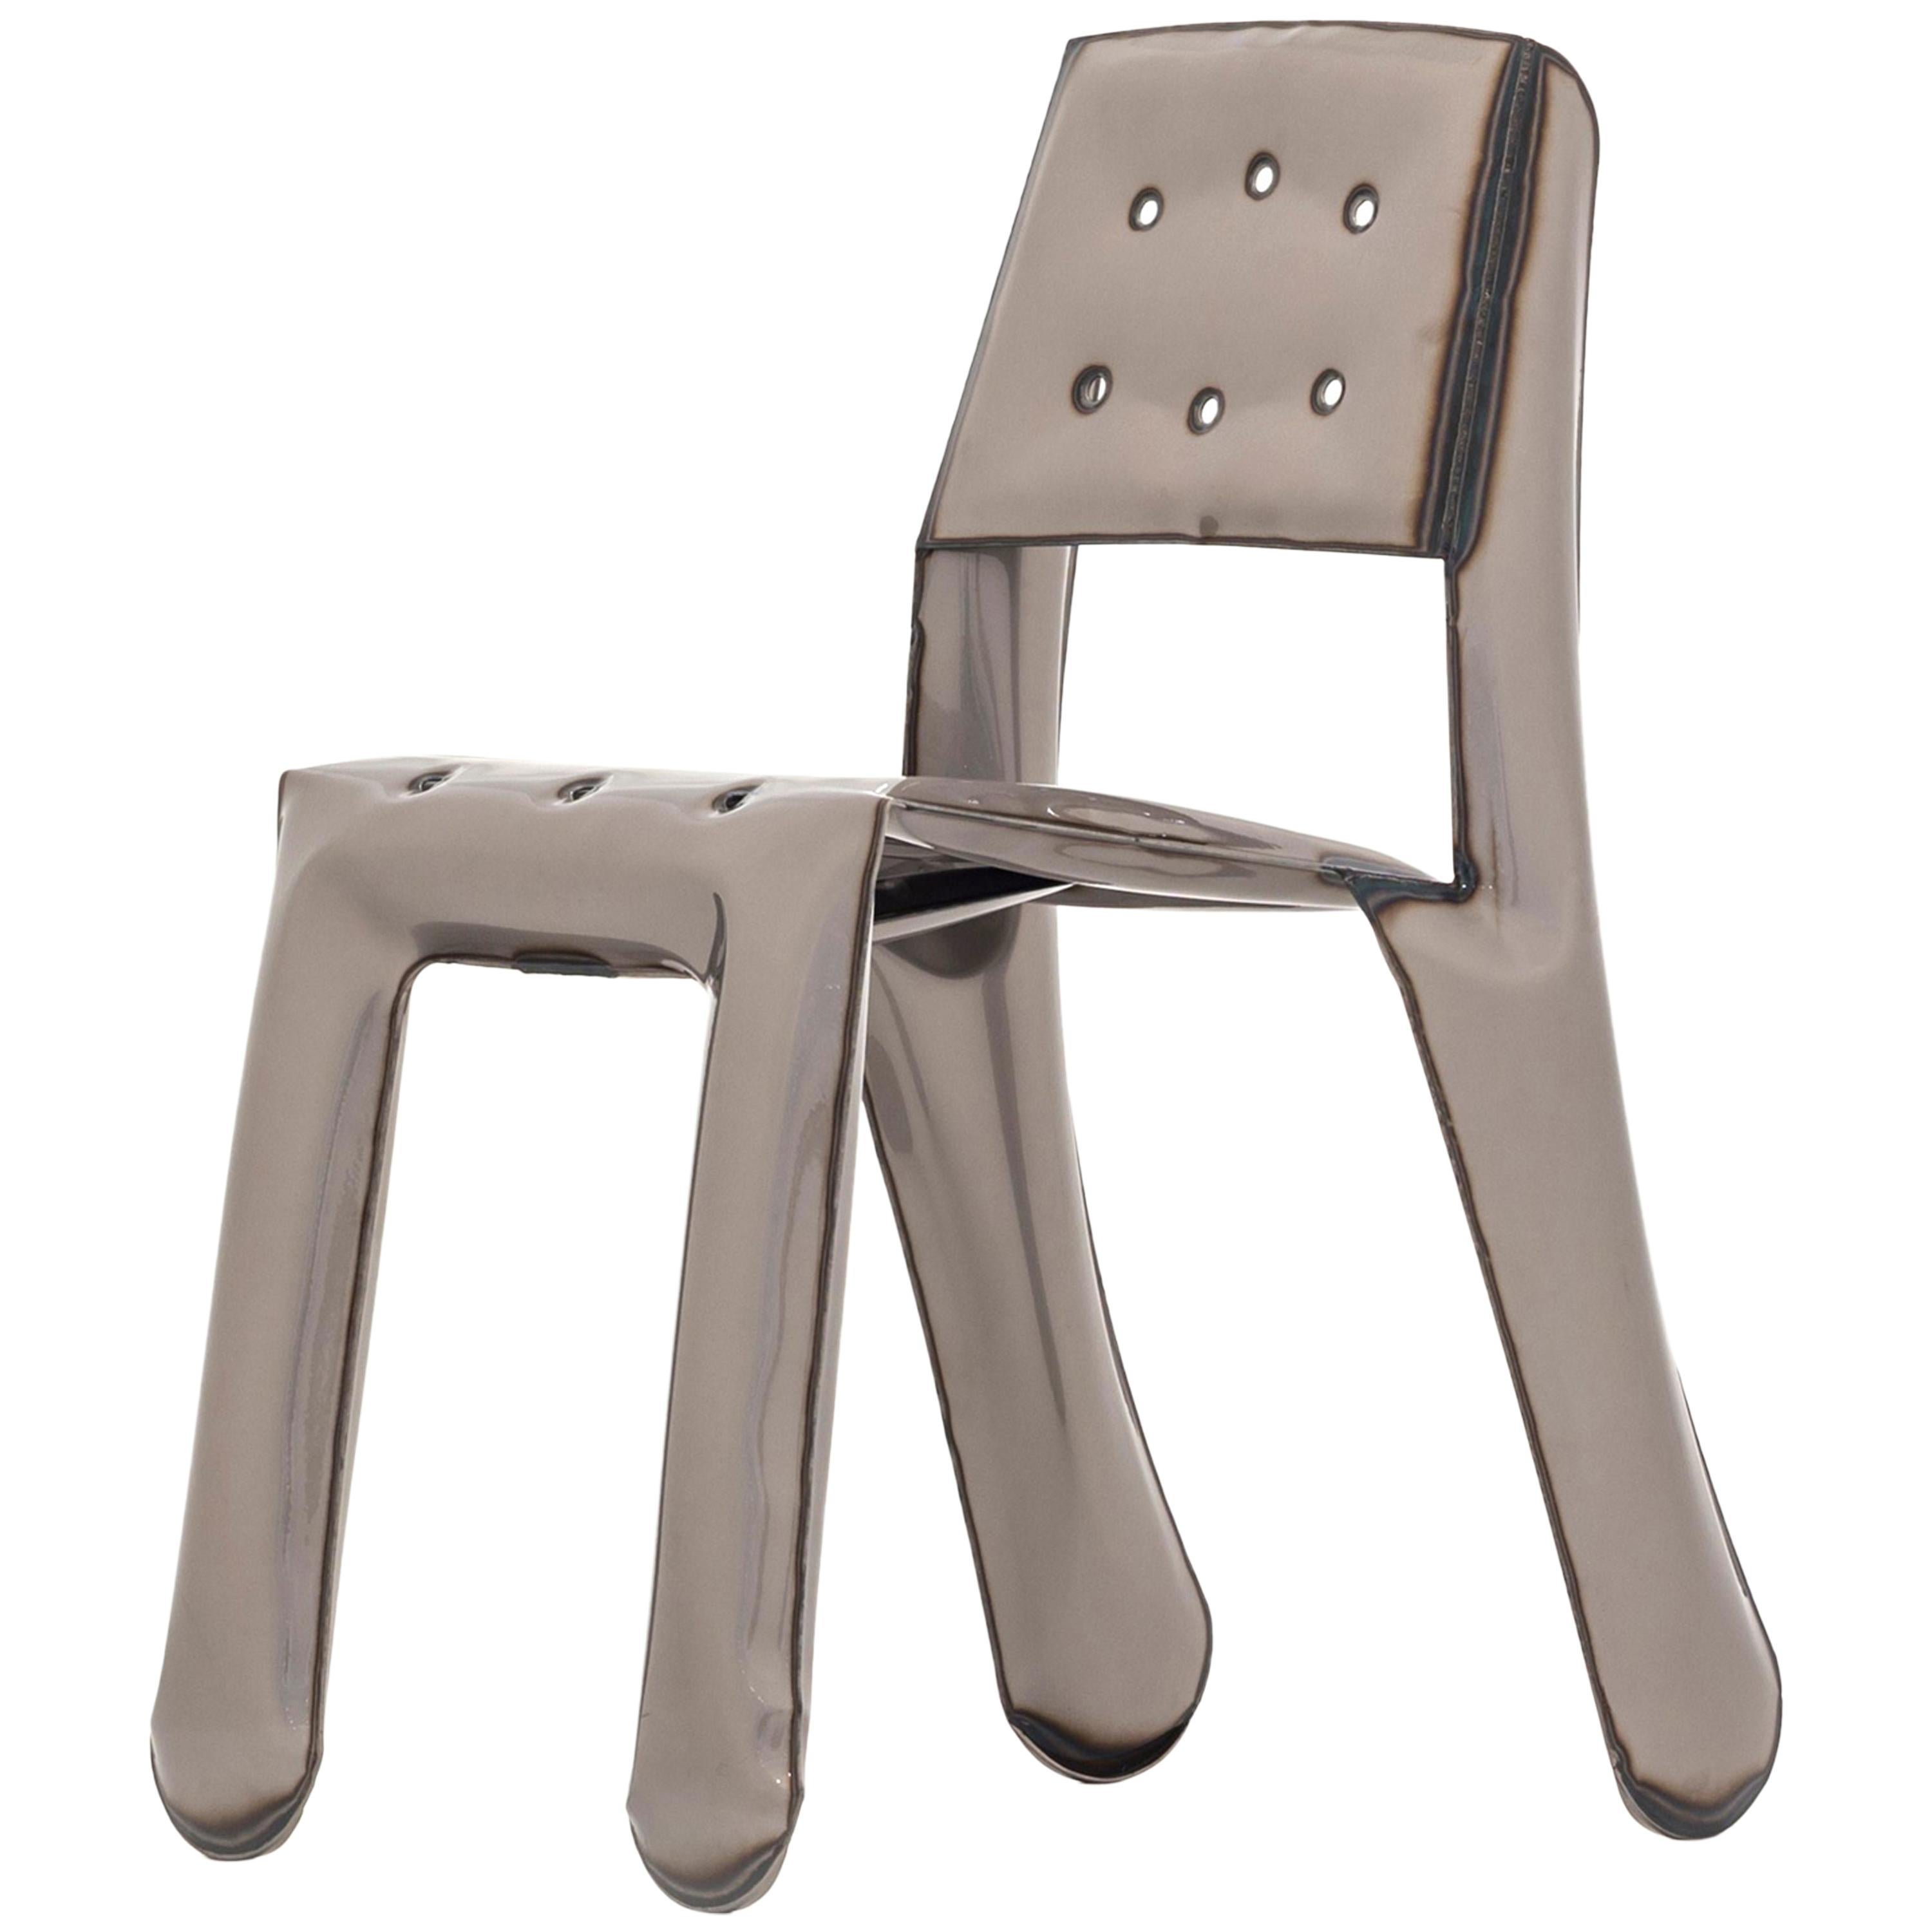 Limited Edition Chippensteel 0.5 Chair in Raw Lacquered Steel by Zieta For Sale